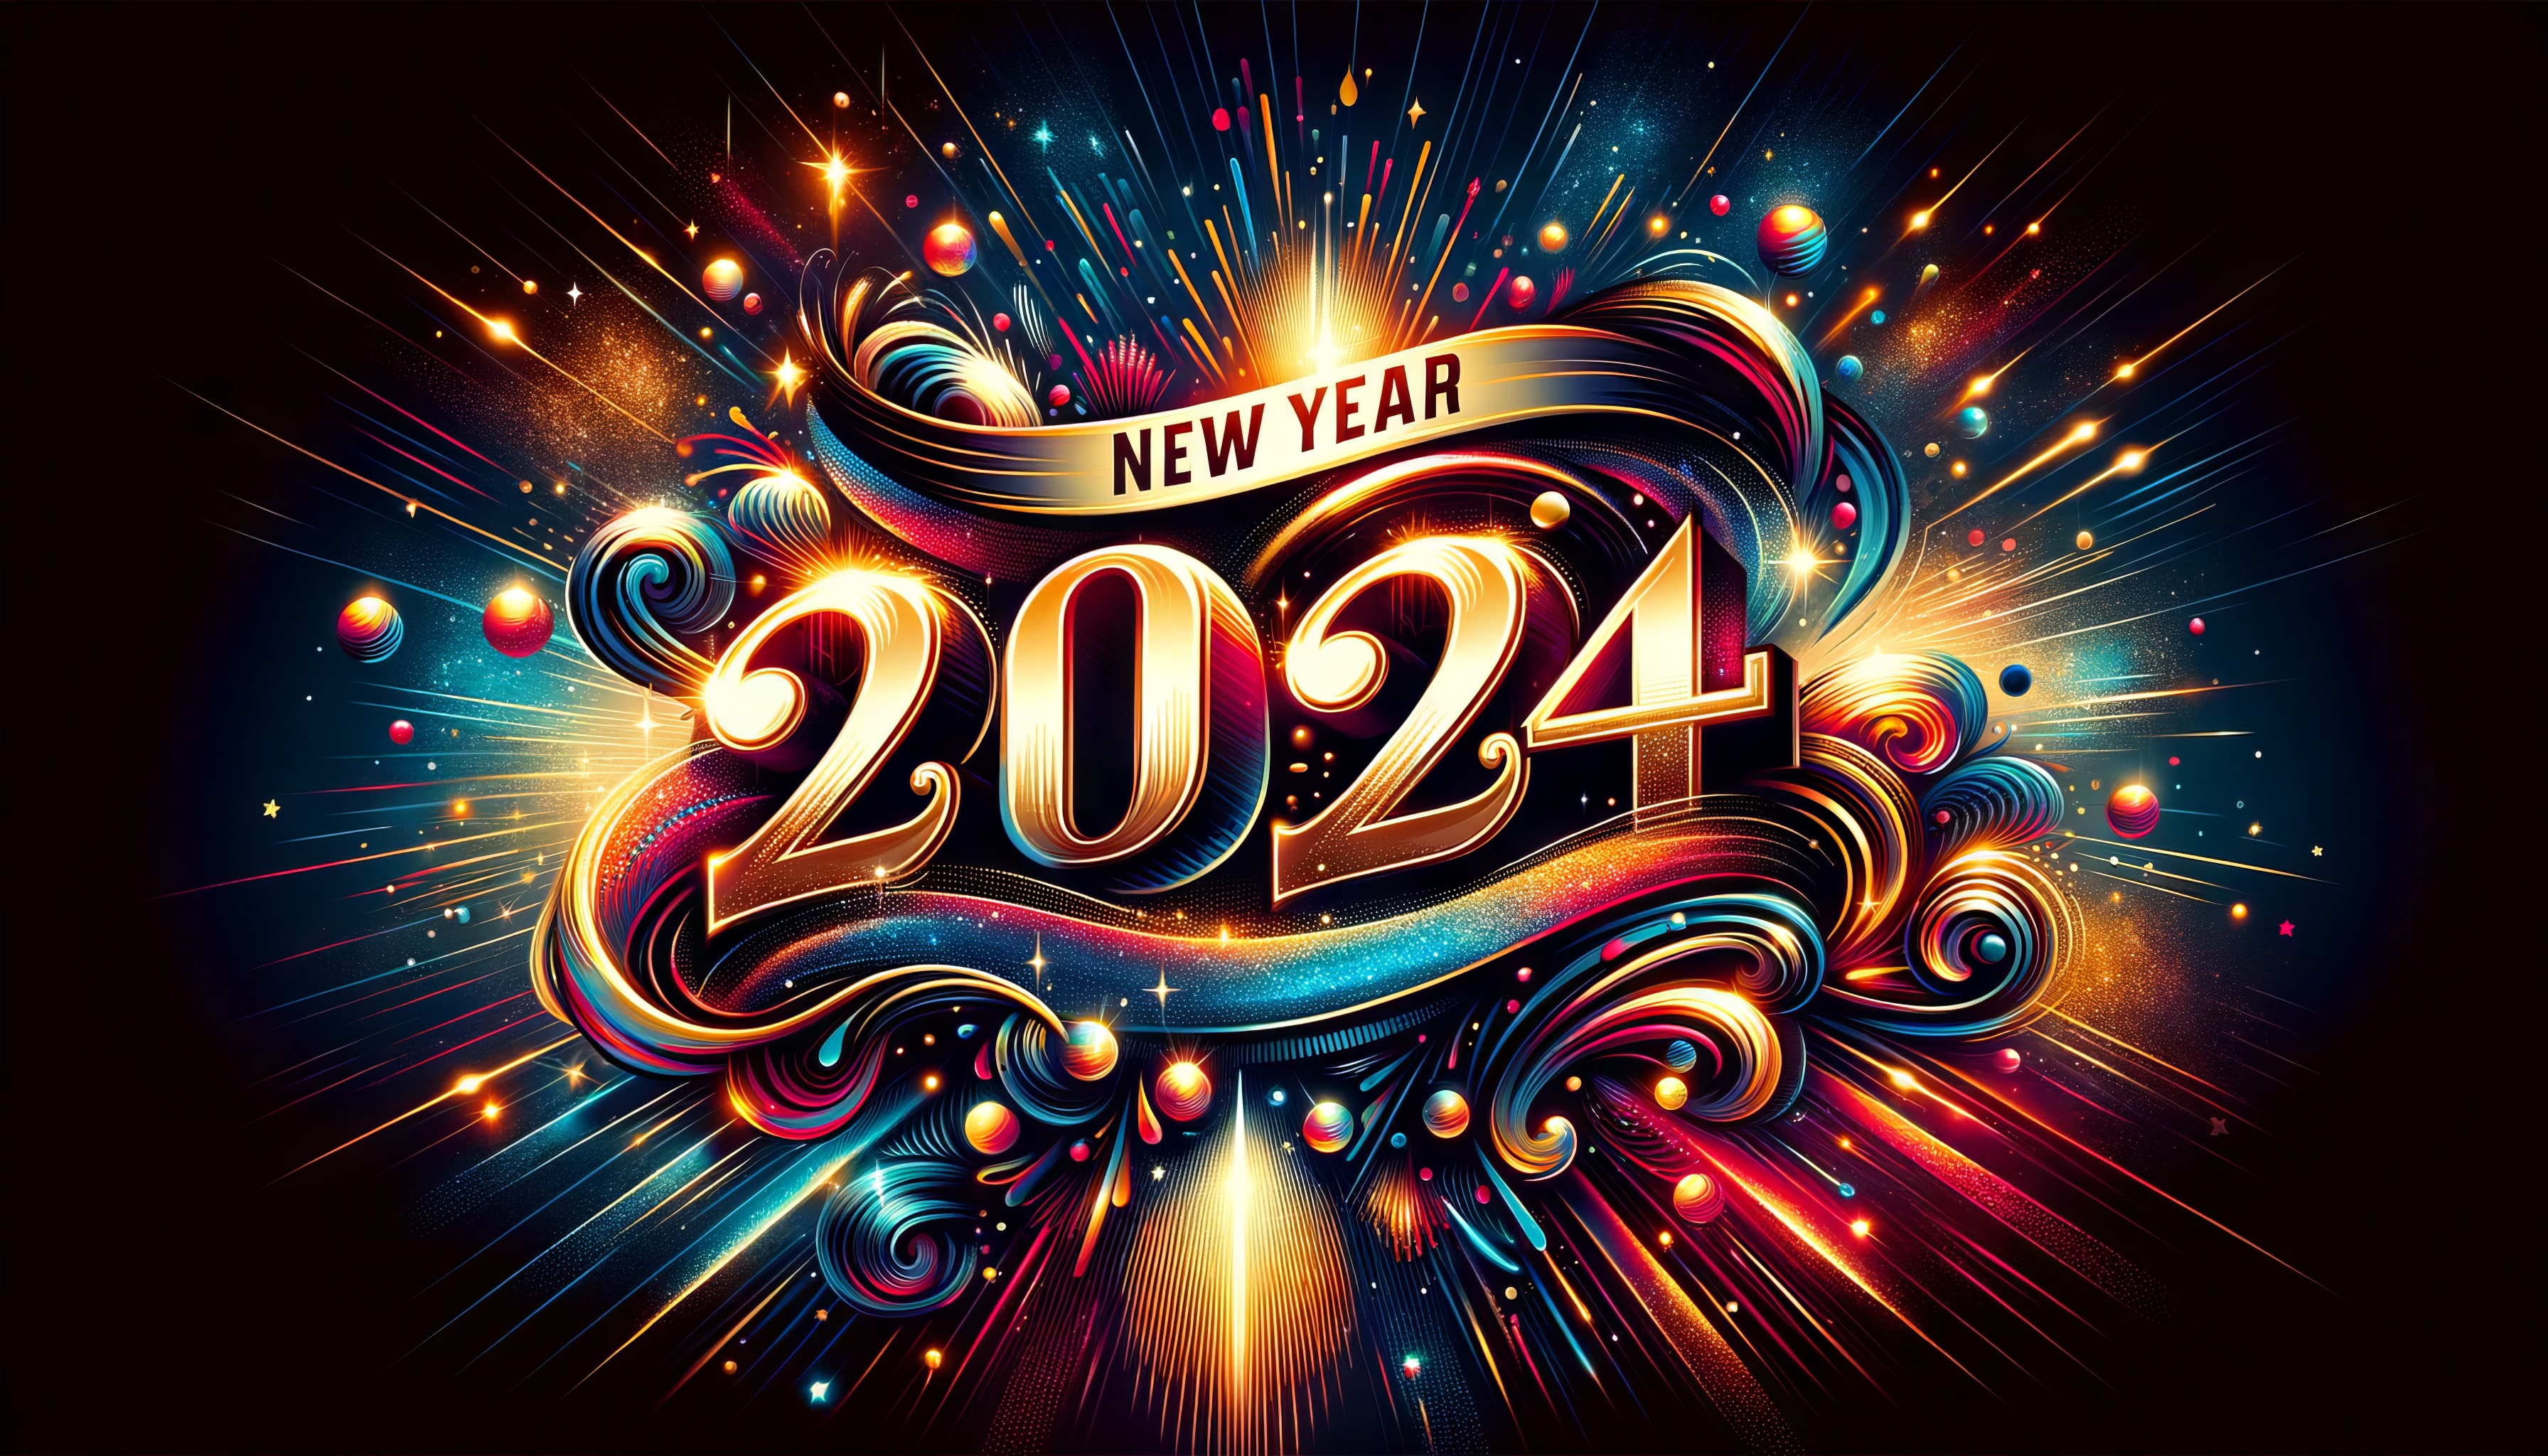 Vibrant New Year 2024 HD desktop wallpaper featuring colorful fireworks and festive typography design.